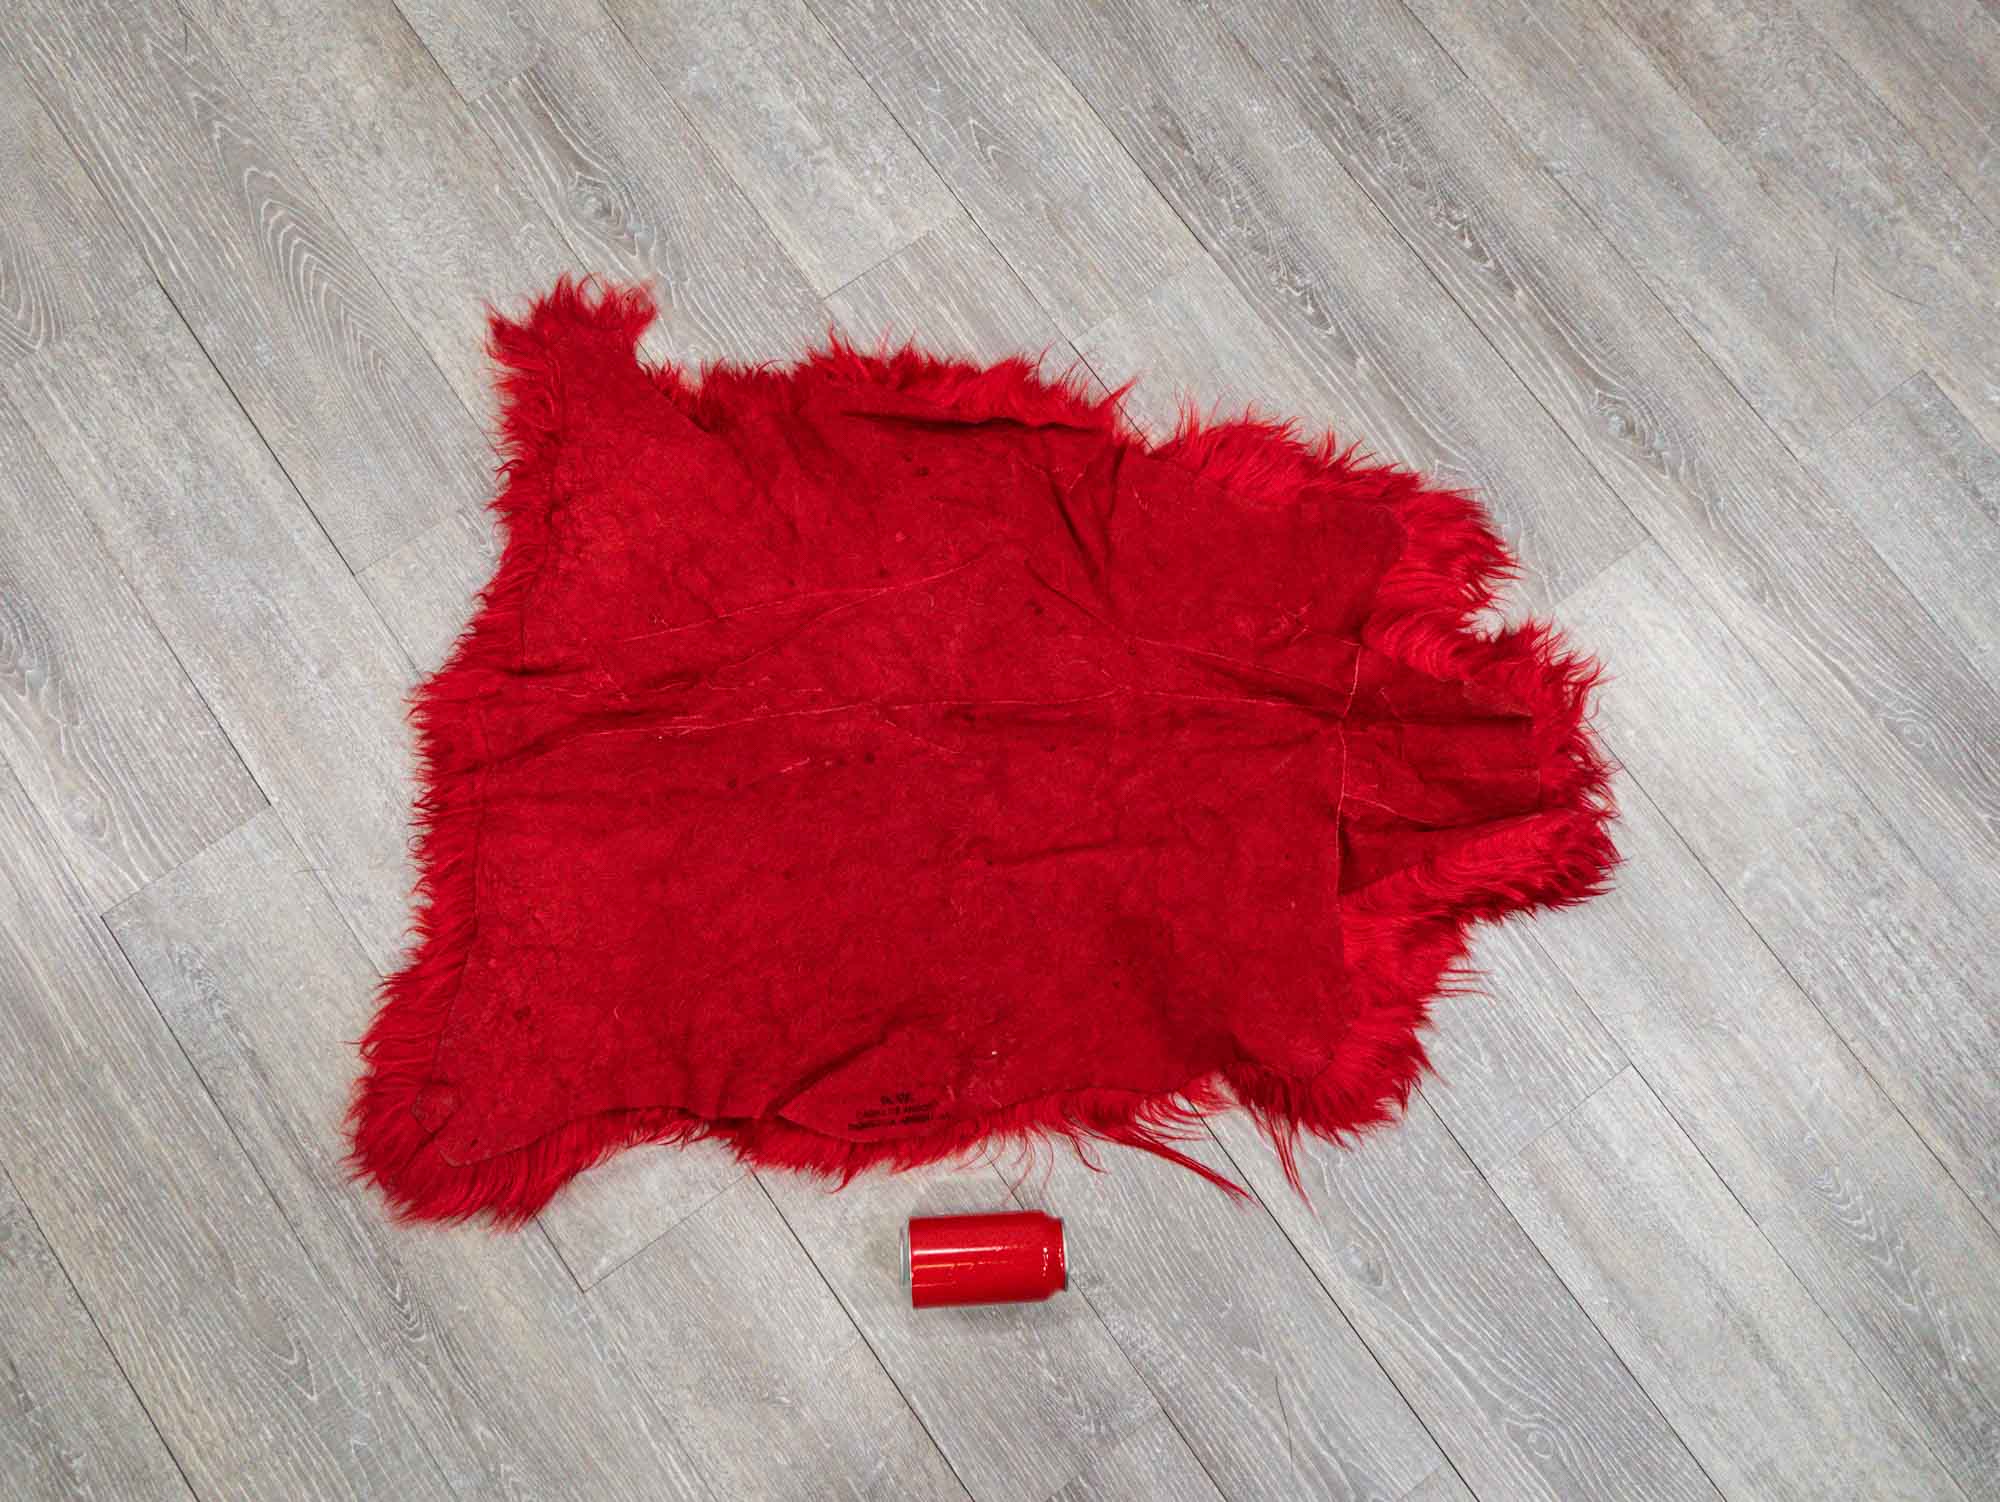 Dyed Angora Goatskin: #1: Extra Large: Red: Gallery Item - 66-A1XL-RD-G4979 (10UB06)